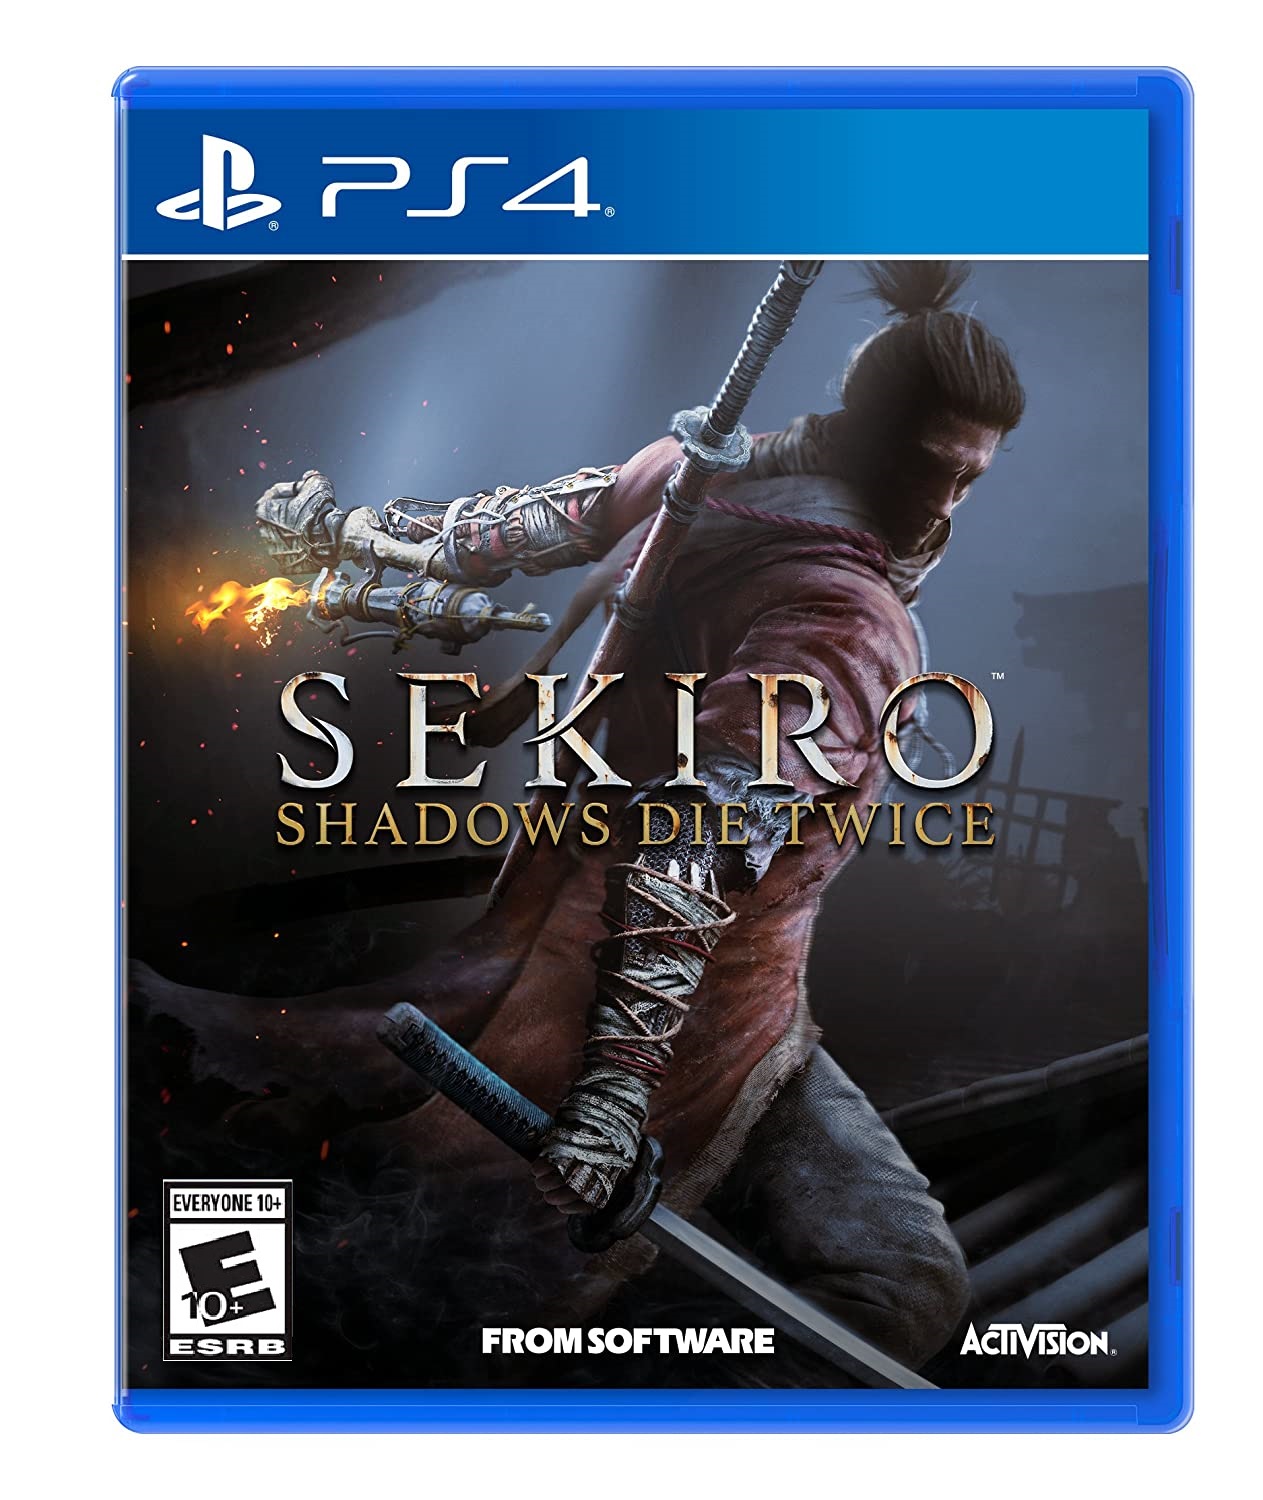 Sekiro: Shadows Die Twice, Activision, PlayStation 4, 047875882928 - image 1 of 5